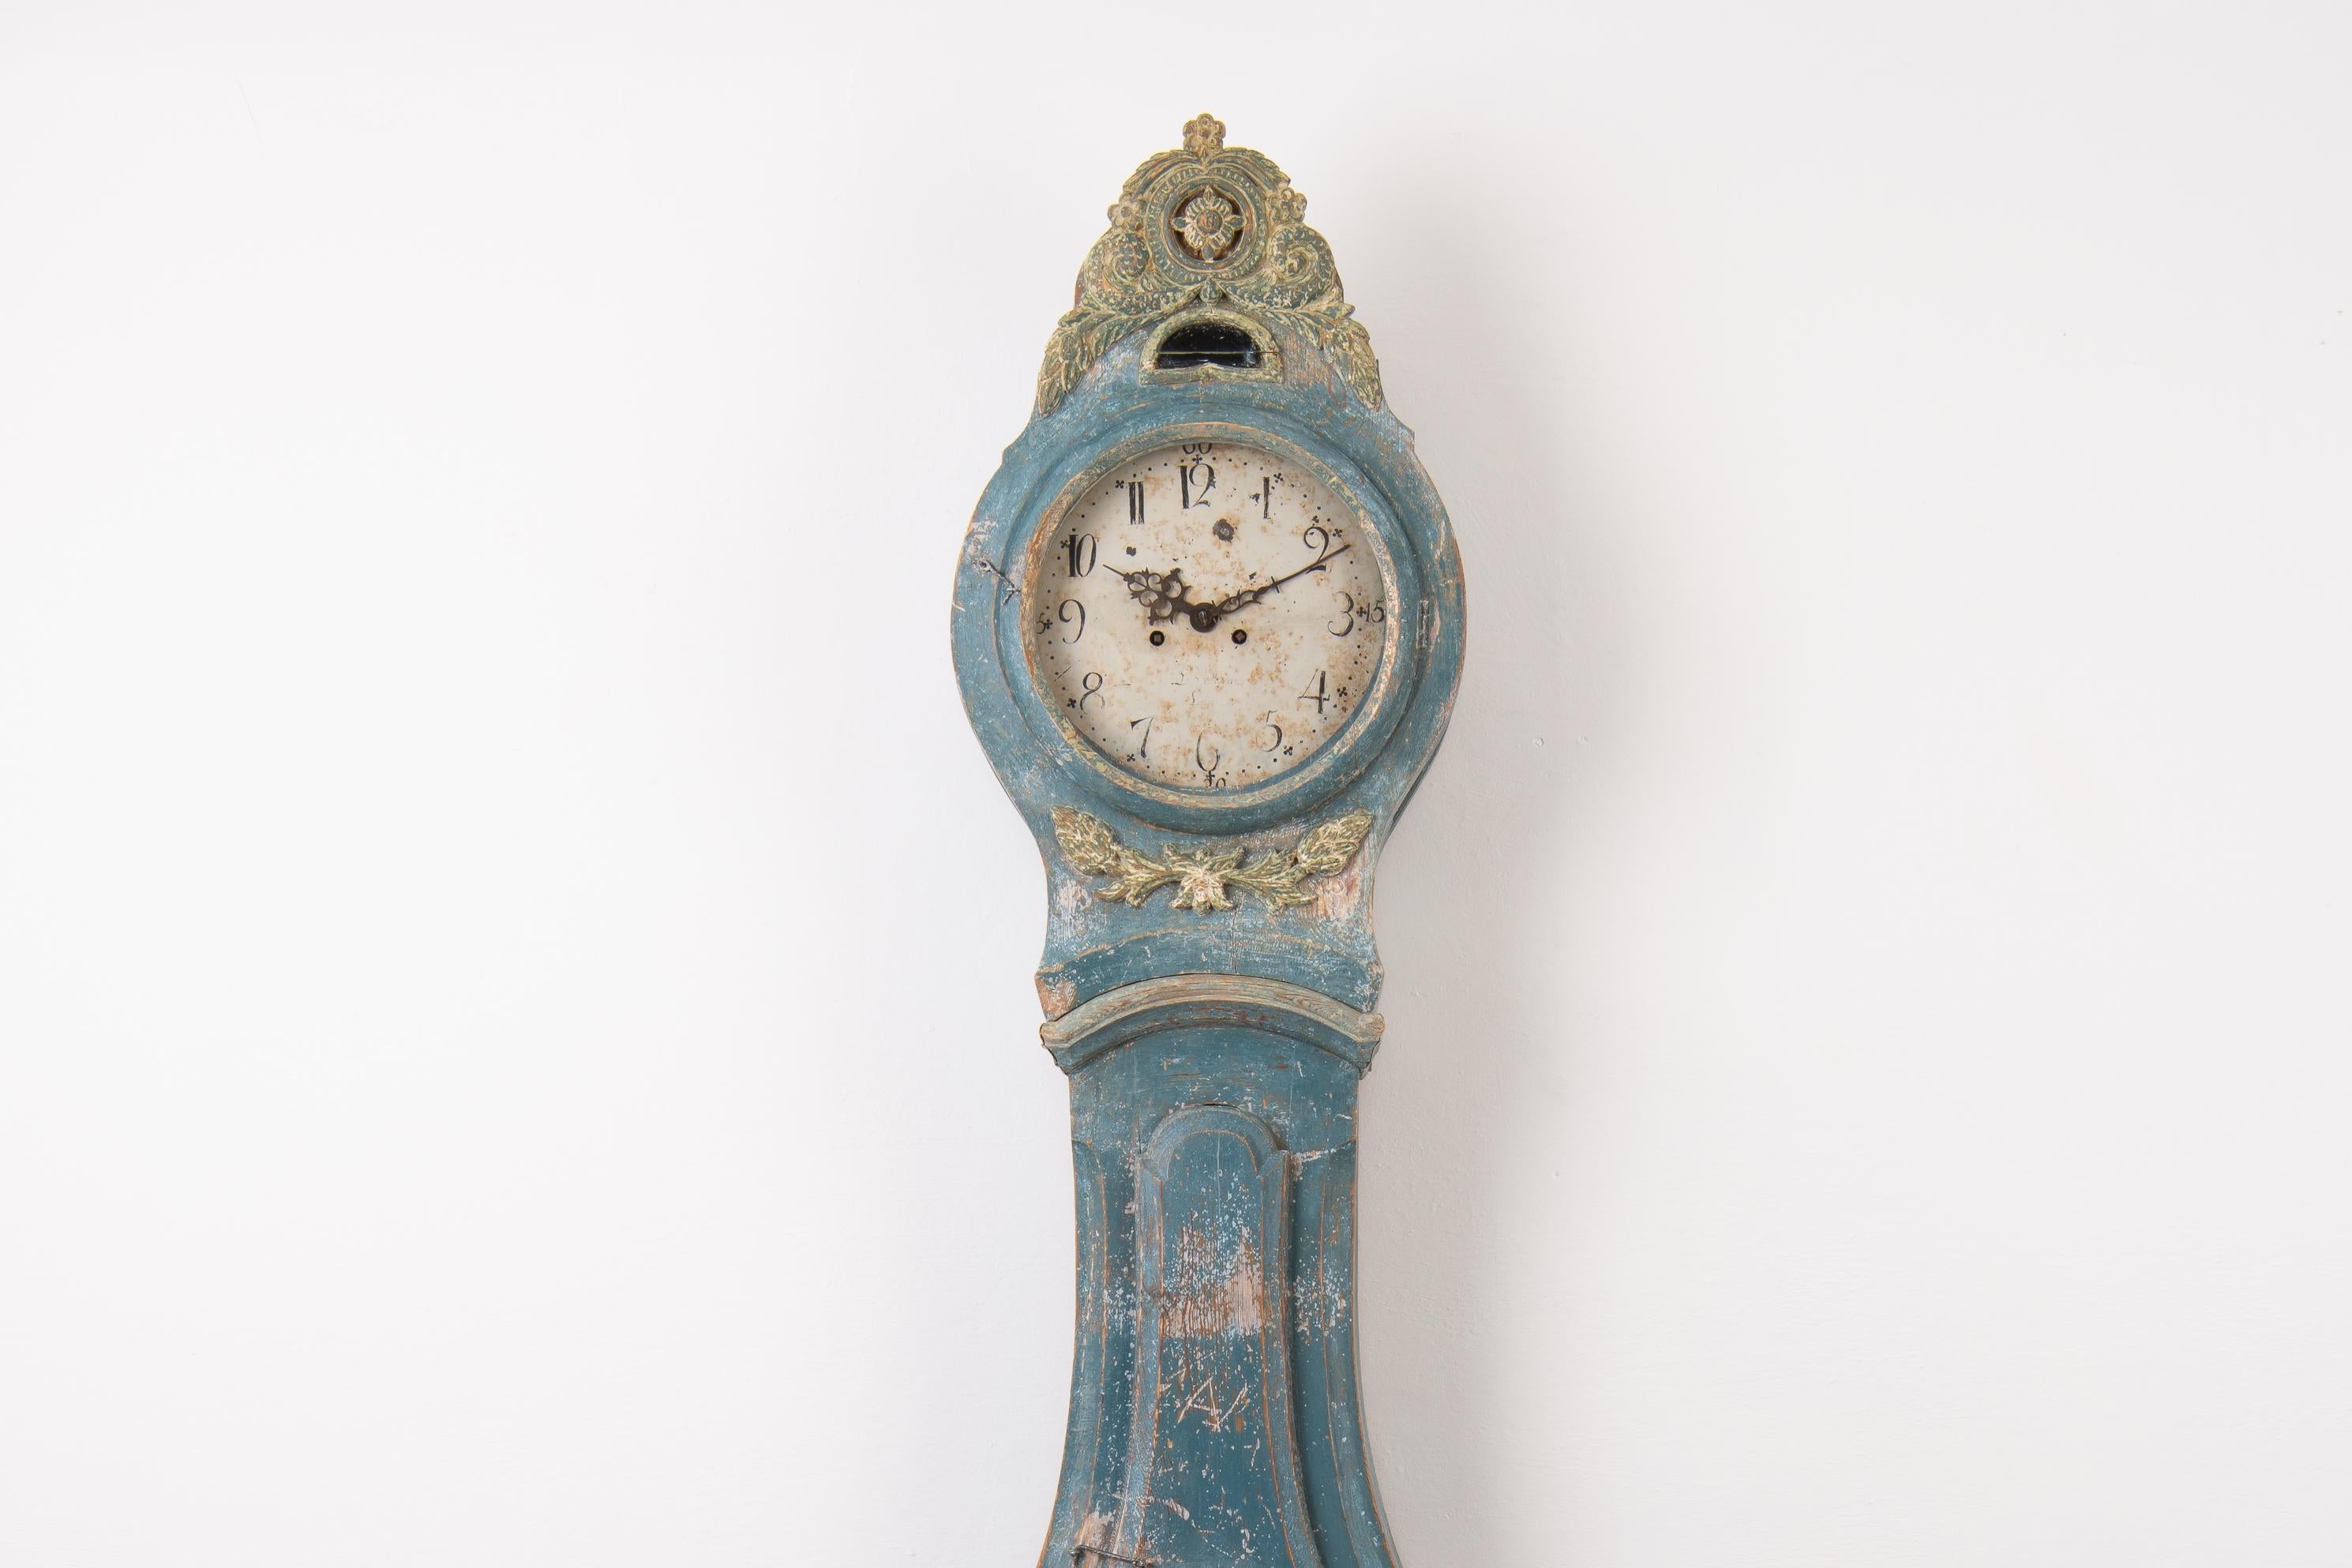 Swedish long case clock from the transitional period between Rococo and Neoclassicism. The clock has influences from both periods. The blue paint is the original first layer and it has naturally patinated over the years. The paint is distressed in